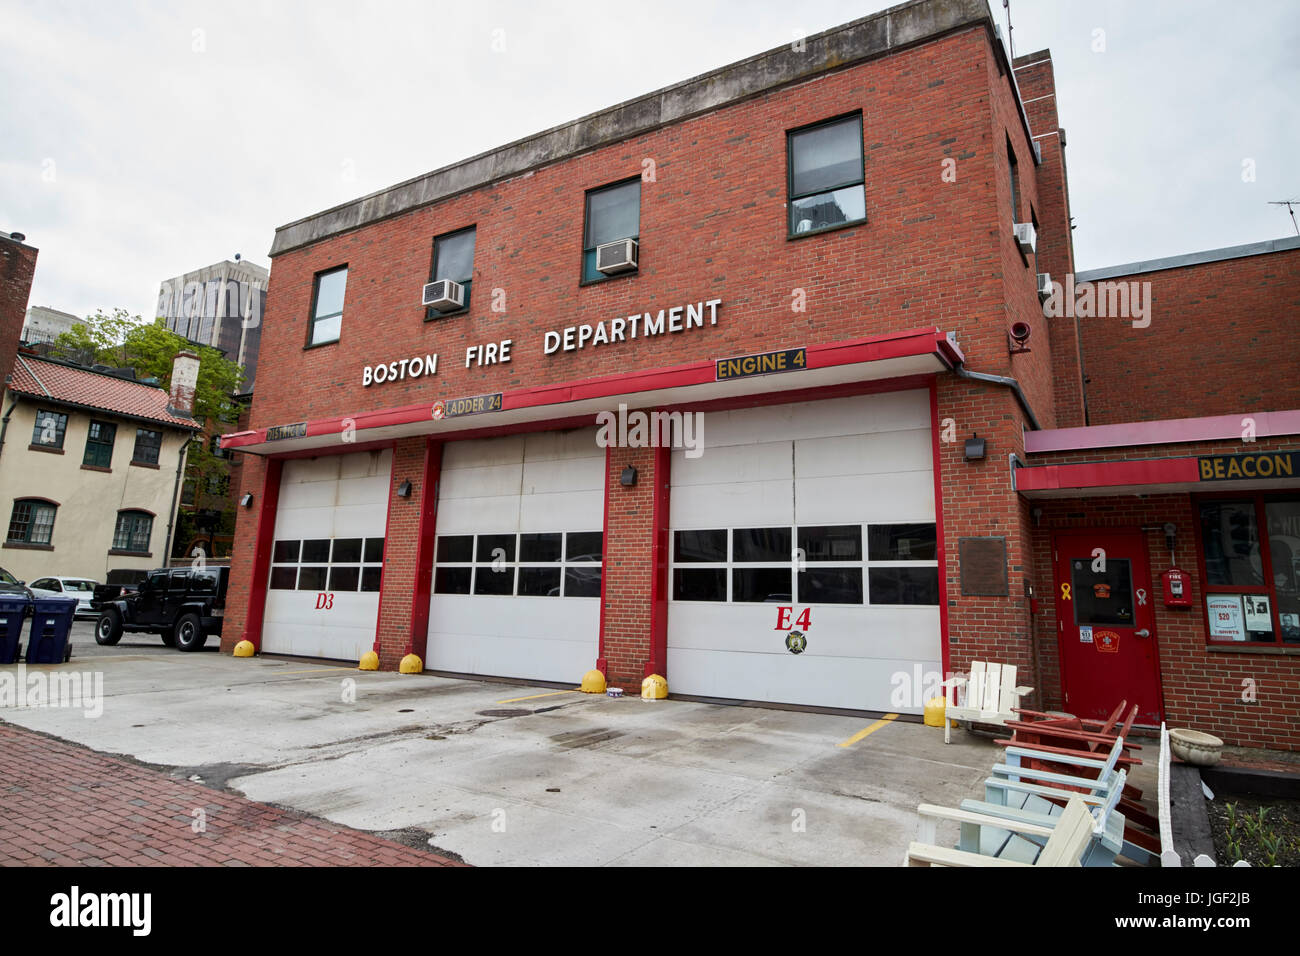 Boston Fire Department fire station district 3 ladder 24 engine 4 USA Stock Photo